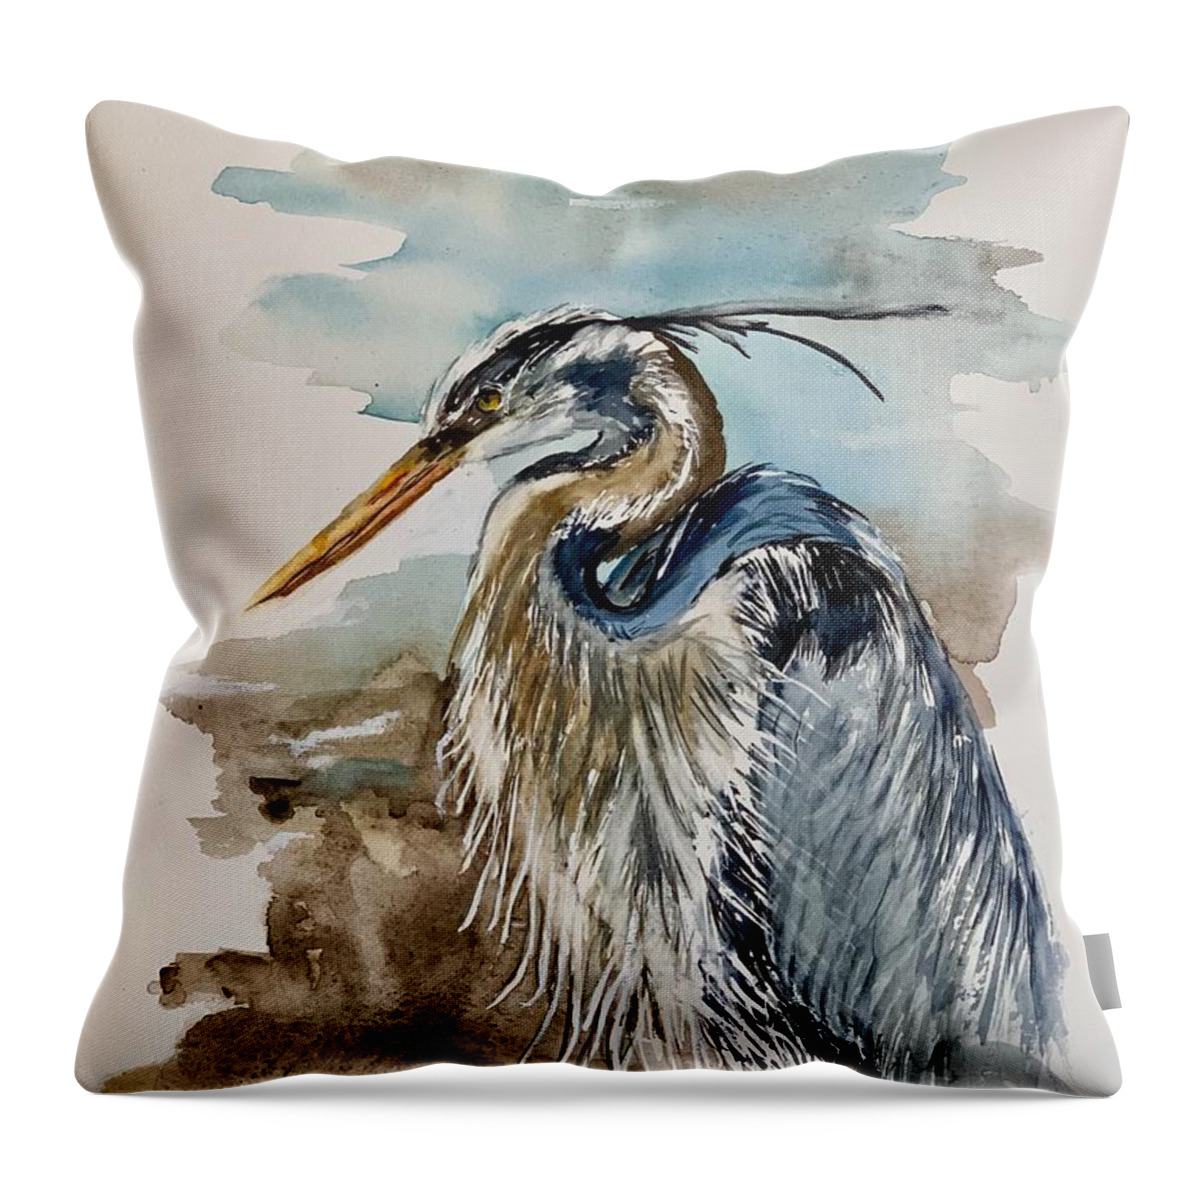  Throw Pillow featuring the painting The bird by Diane Ziemski